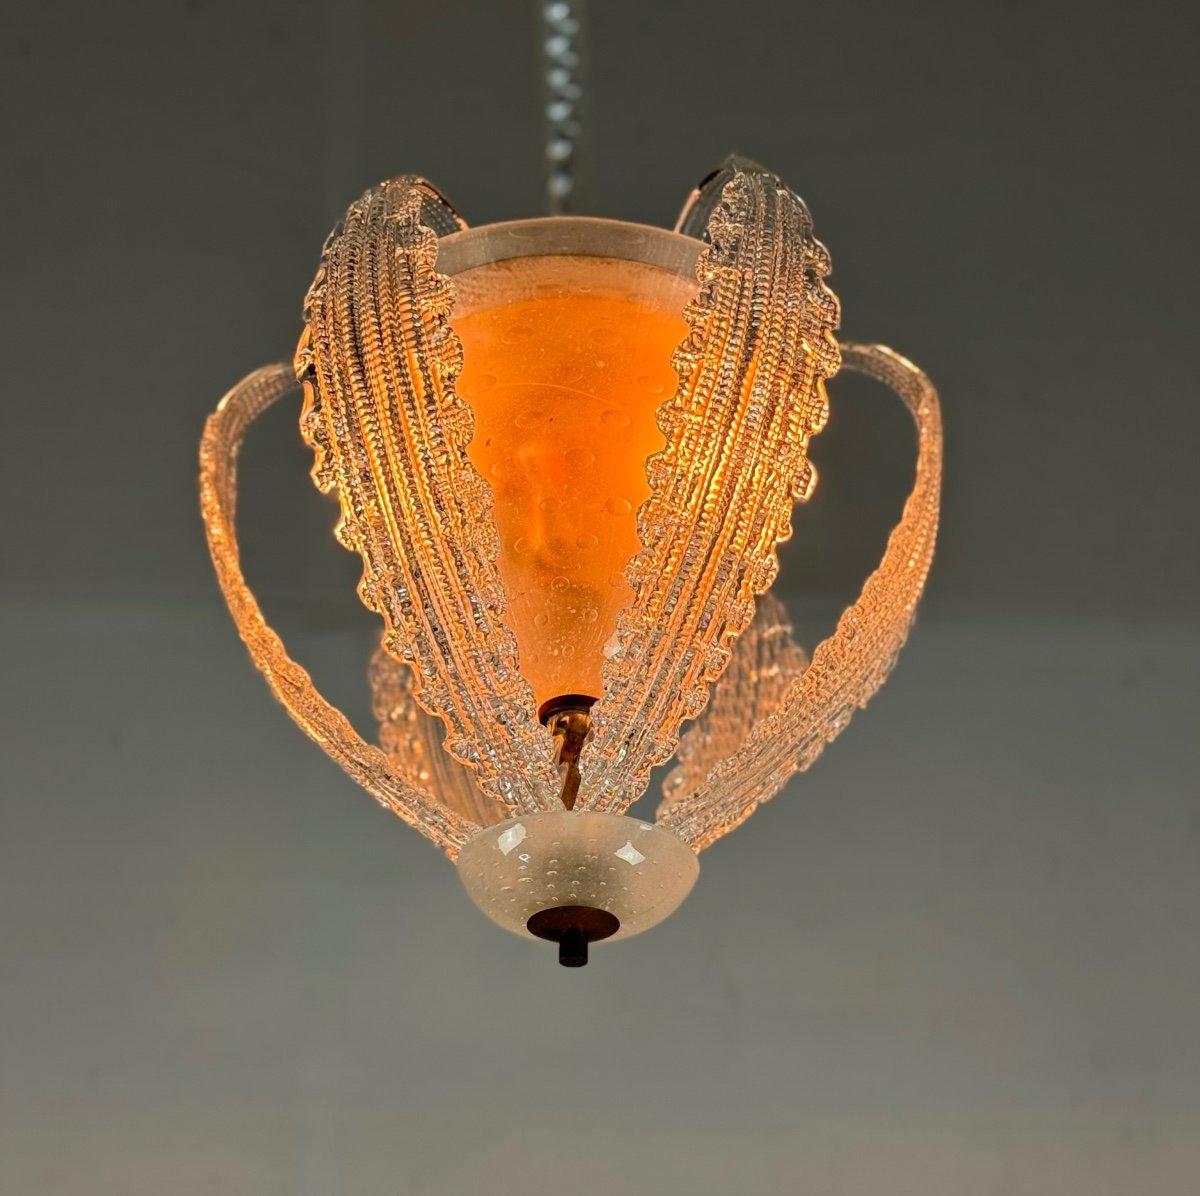 Venetian Chandelier In Colorless Murano Glass

New Electrification

Circa 1950